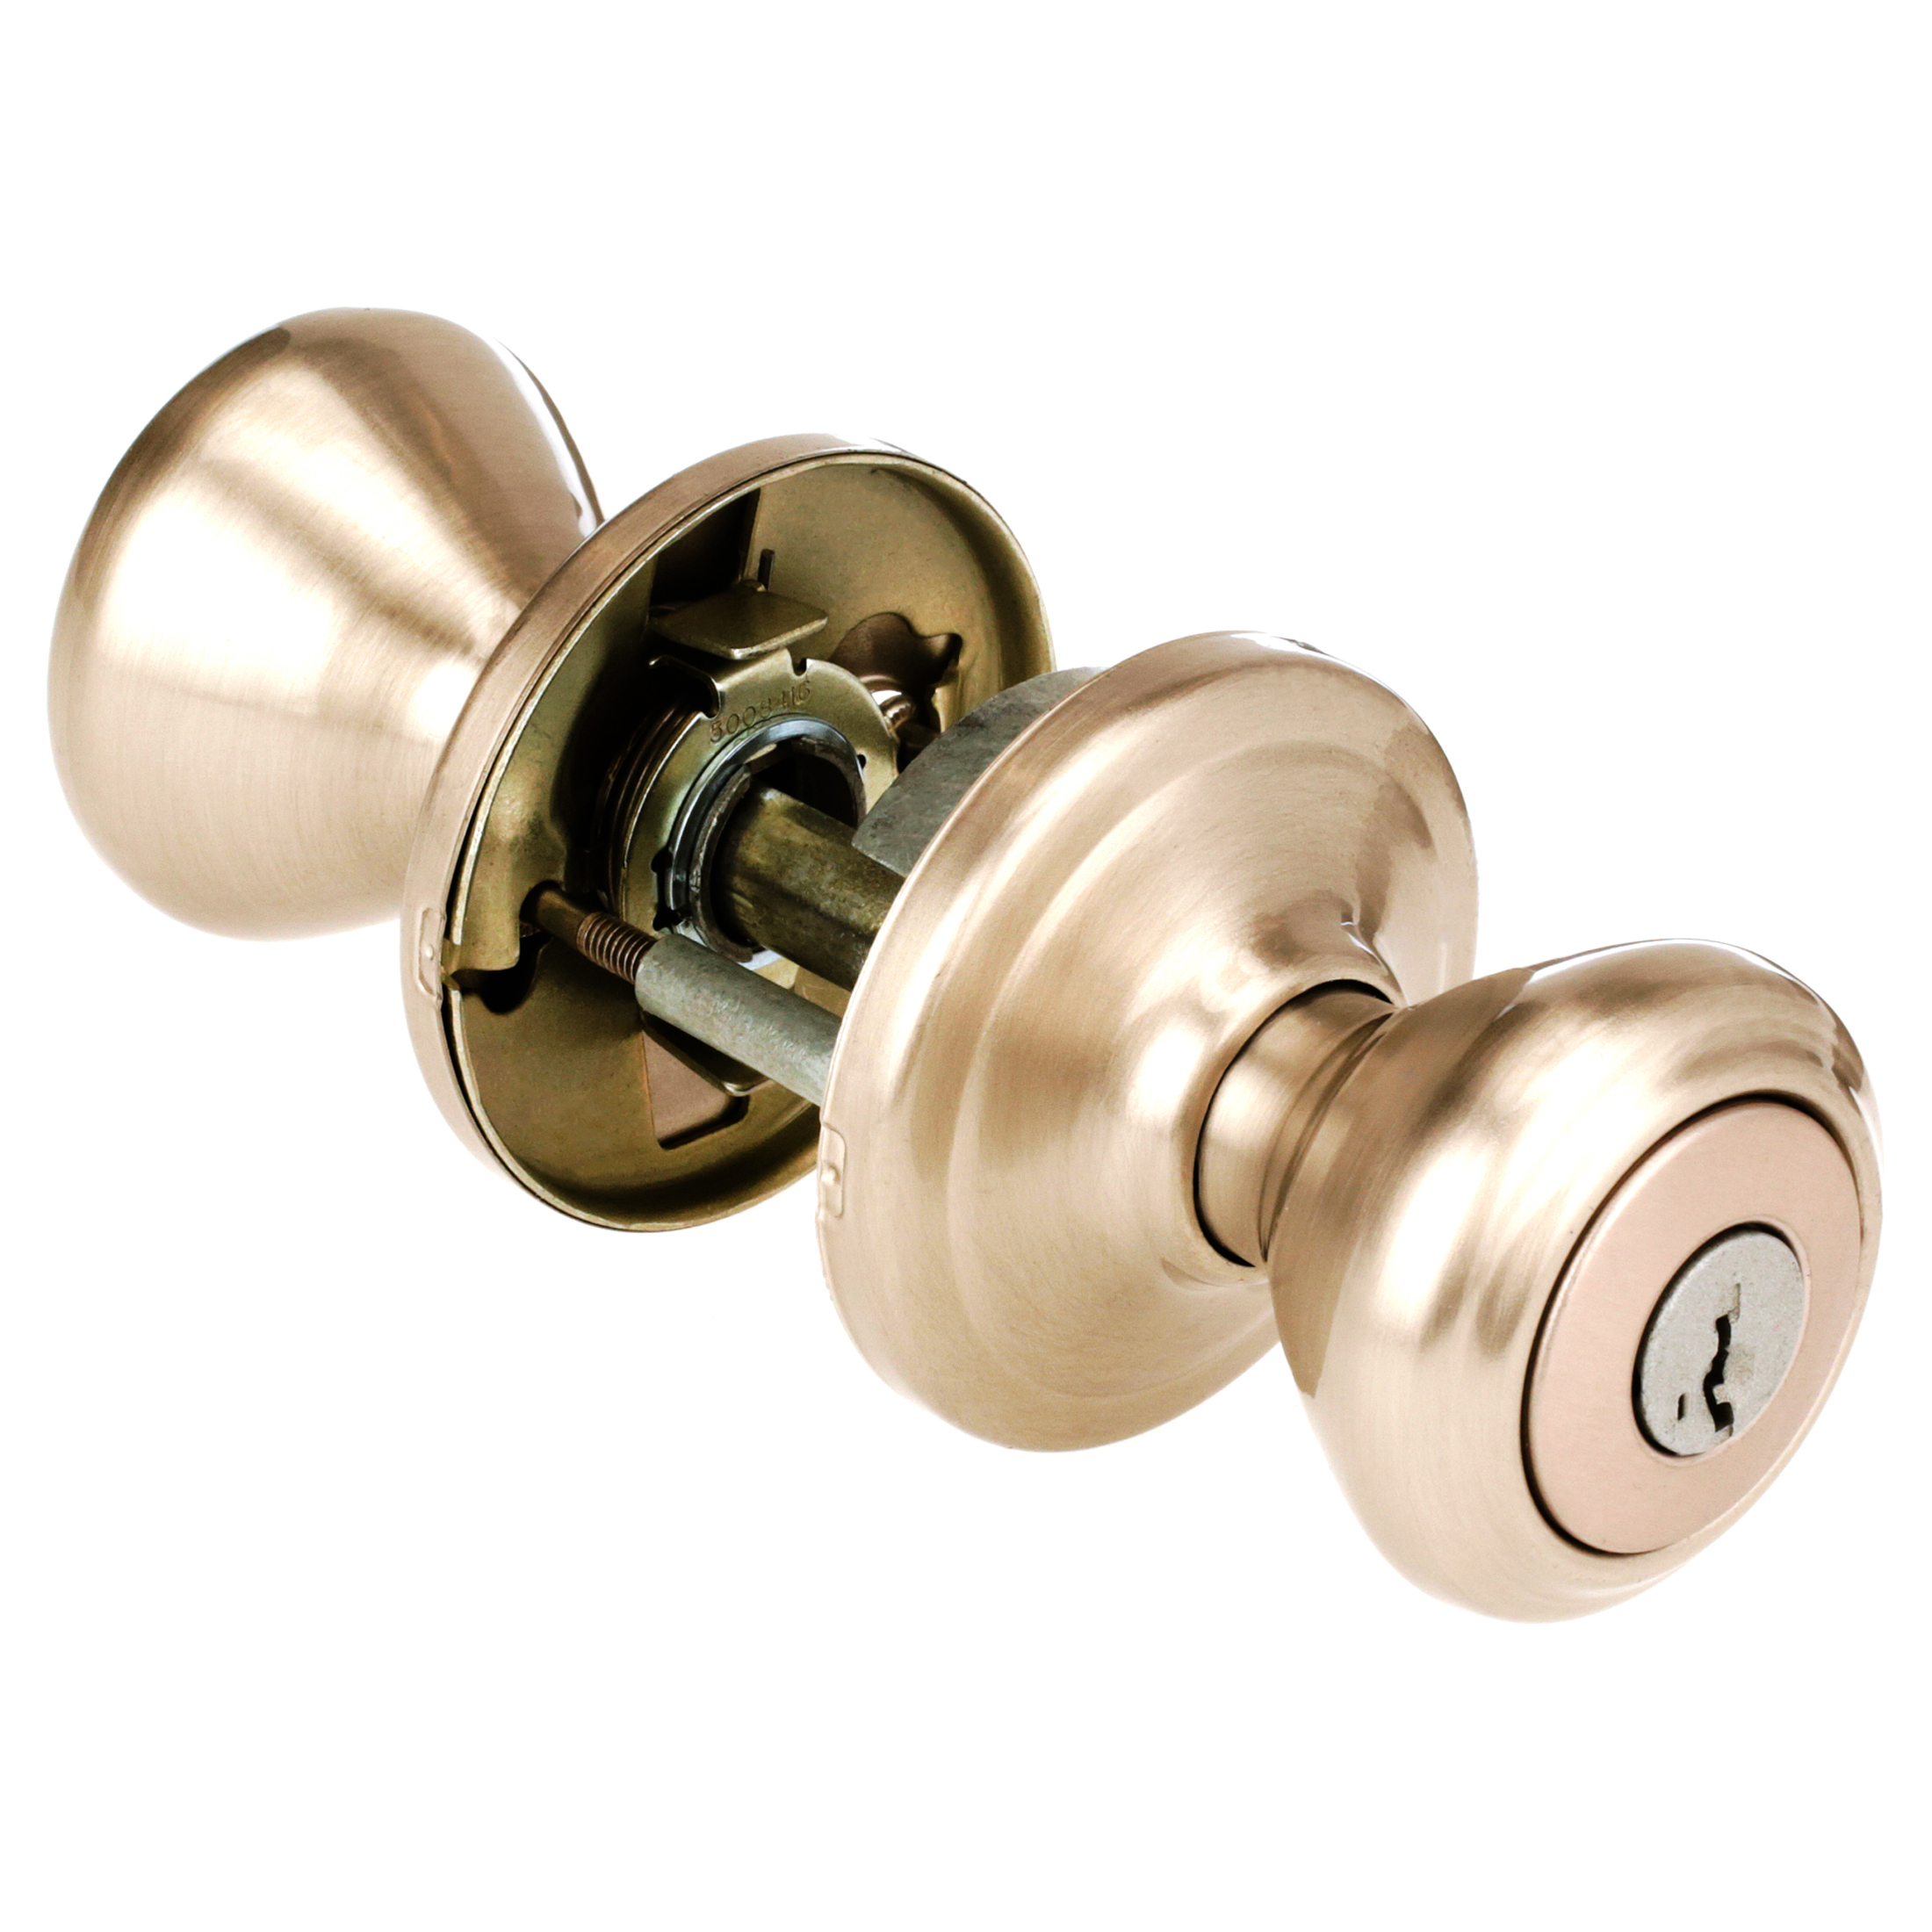 Kwikset Cameron Keyed Entry Knob Featuring Smartkey Security™ in SC 